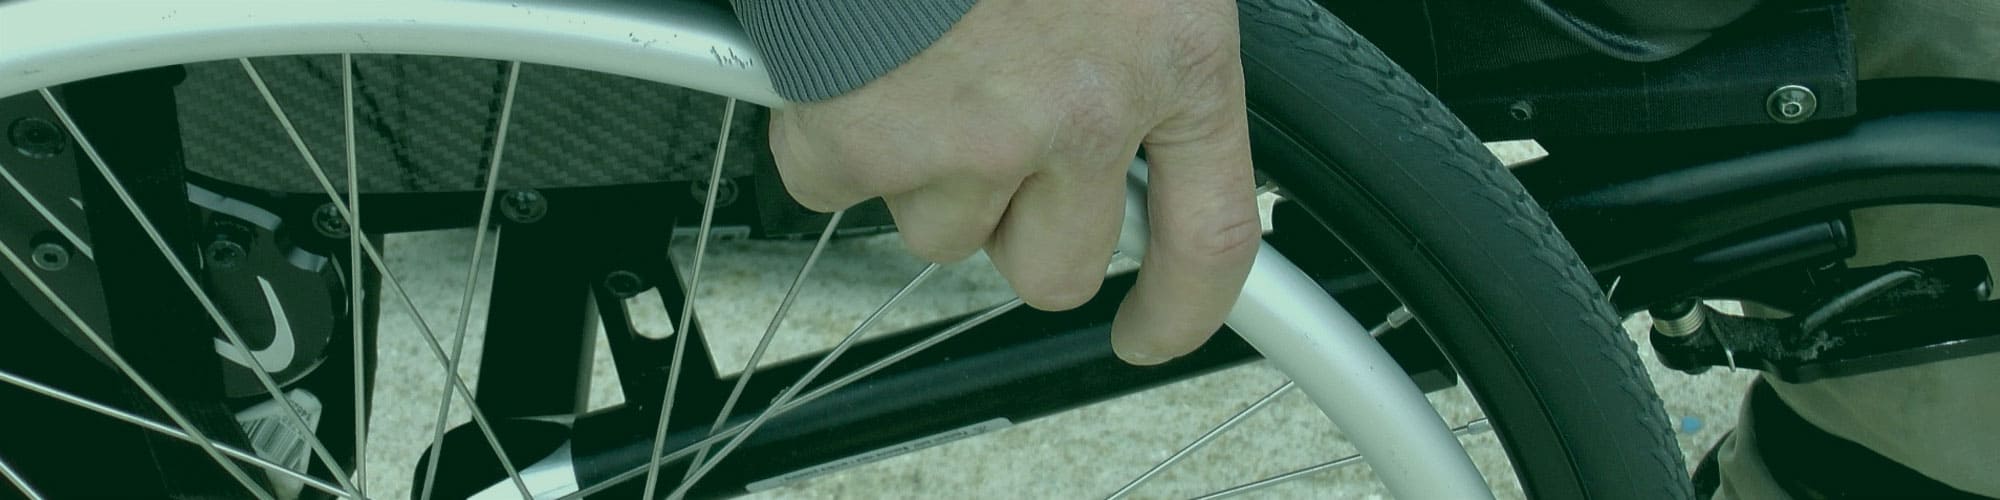 A close-up of a hand holding a wheelchair wheel.